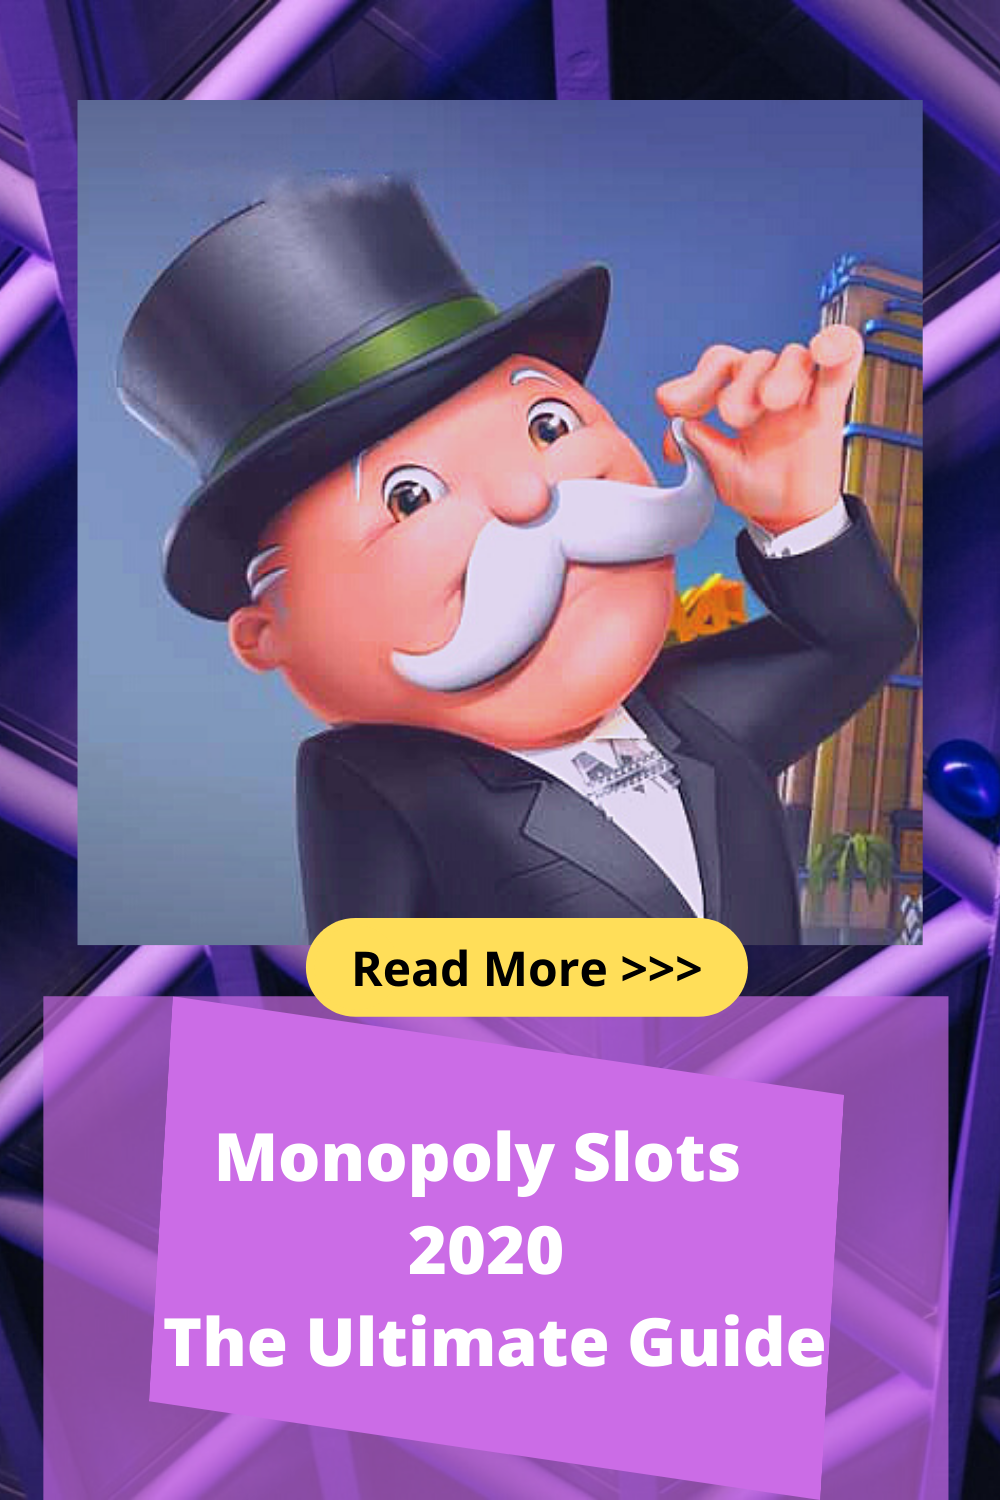 Monopoly slots free coins hack ios